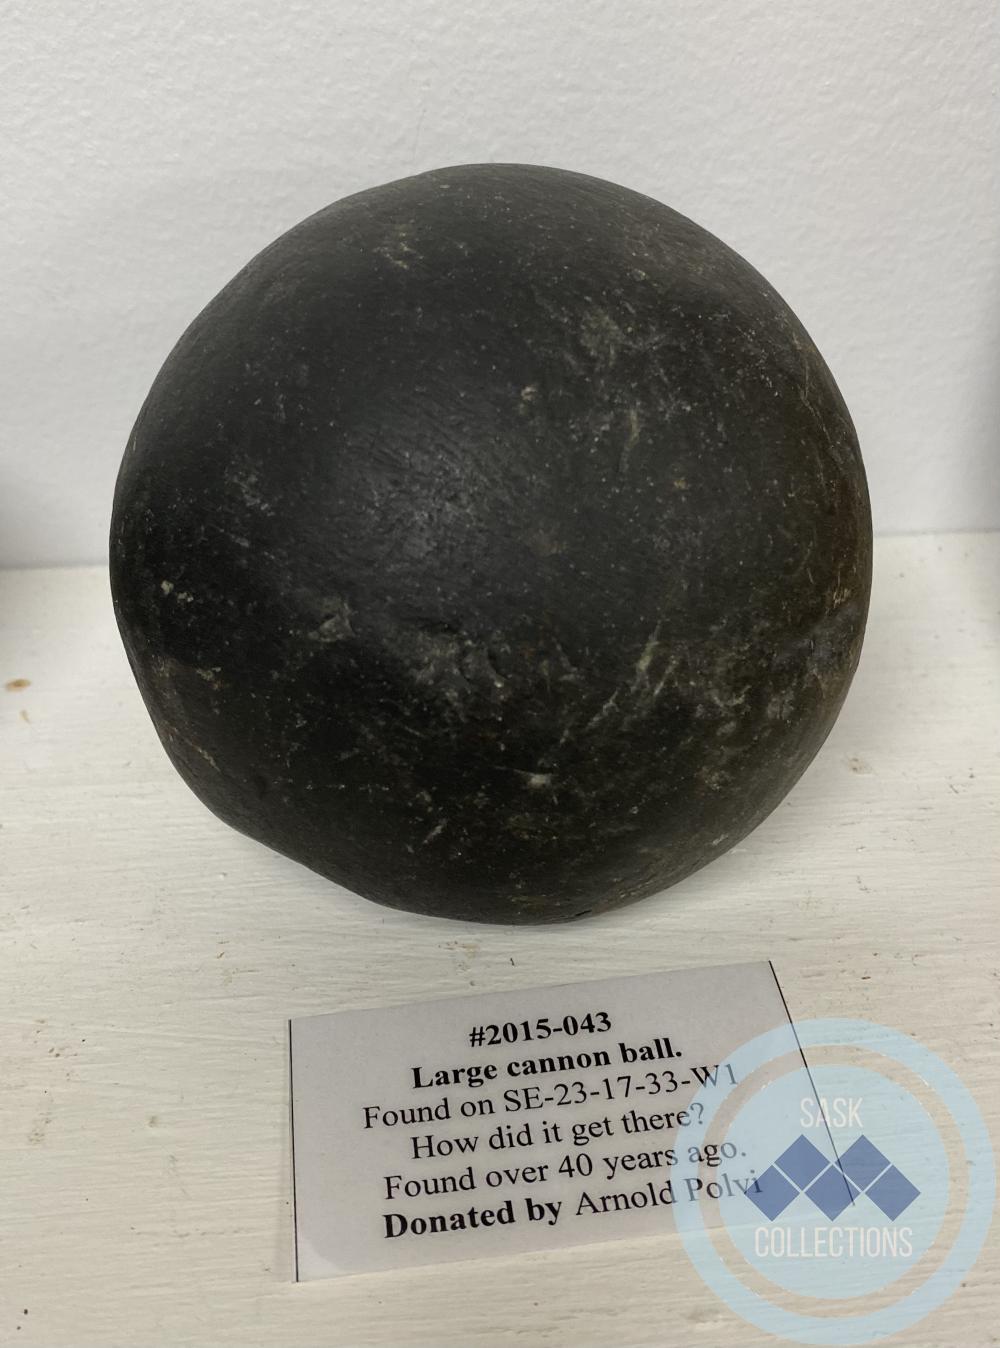 Large cannon ball. Found on SE-23-17-33-W1 How did it get there? Found over 40 years ago.